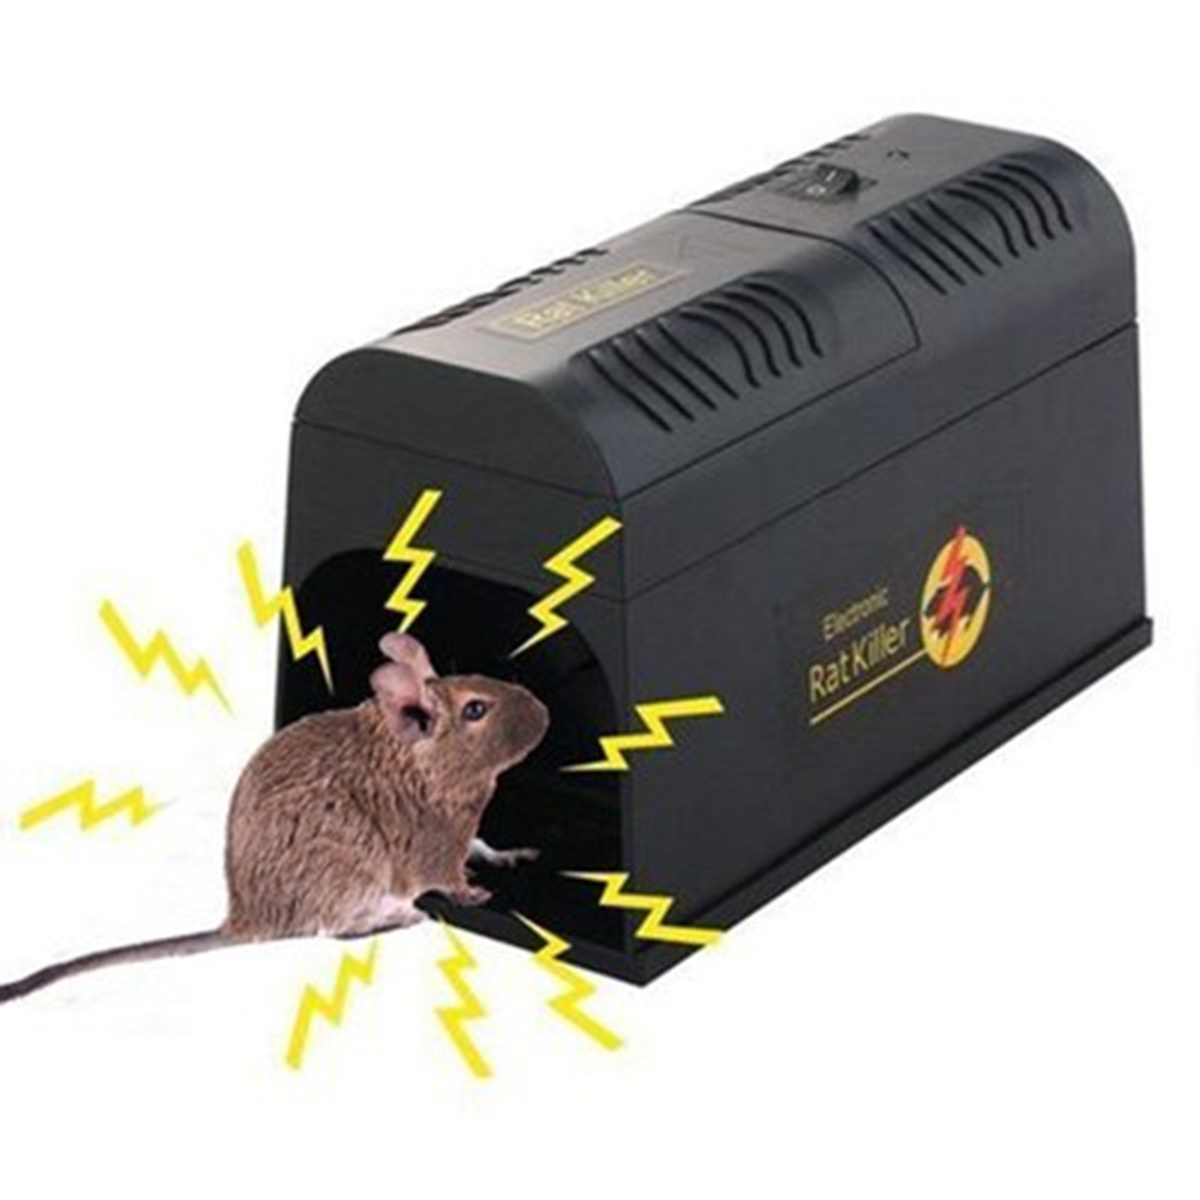 Electronic Rat And Rodent Trap Powfully Kill And Eliminate Rats Mice Or Other Similar Rodents Efficiently And Safely 1